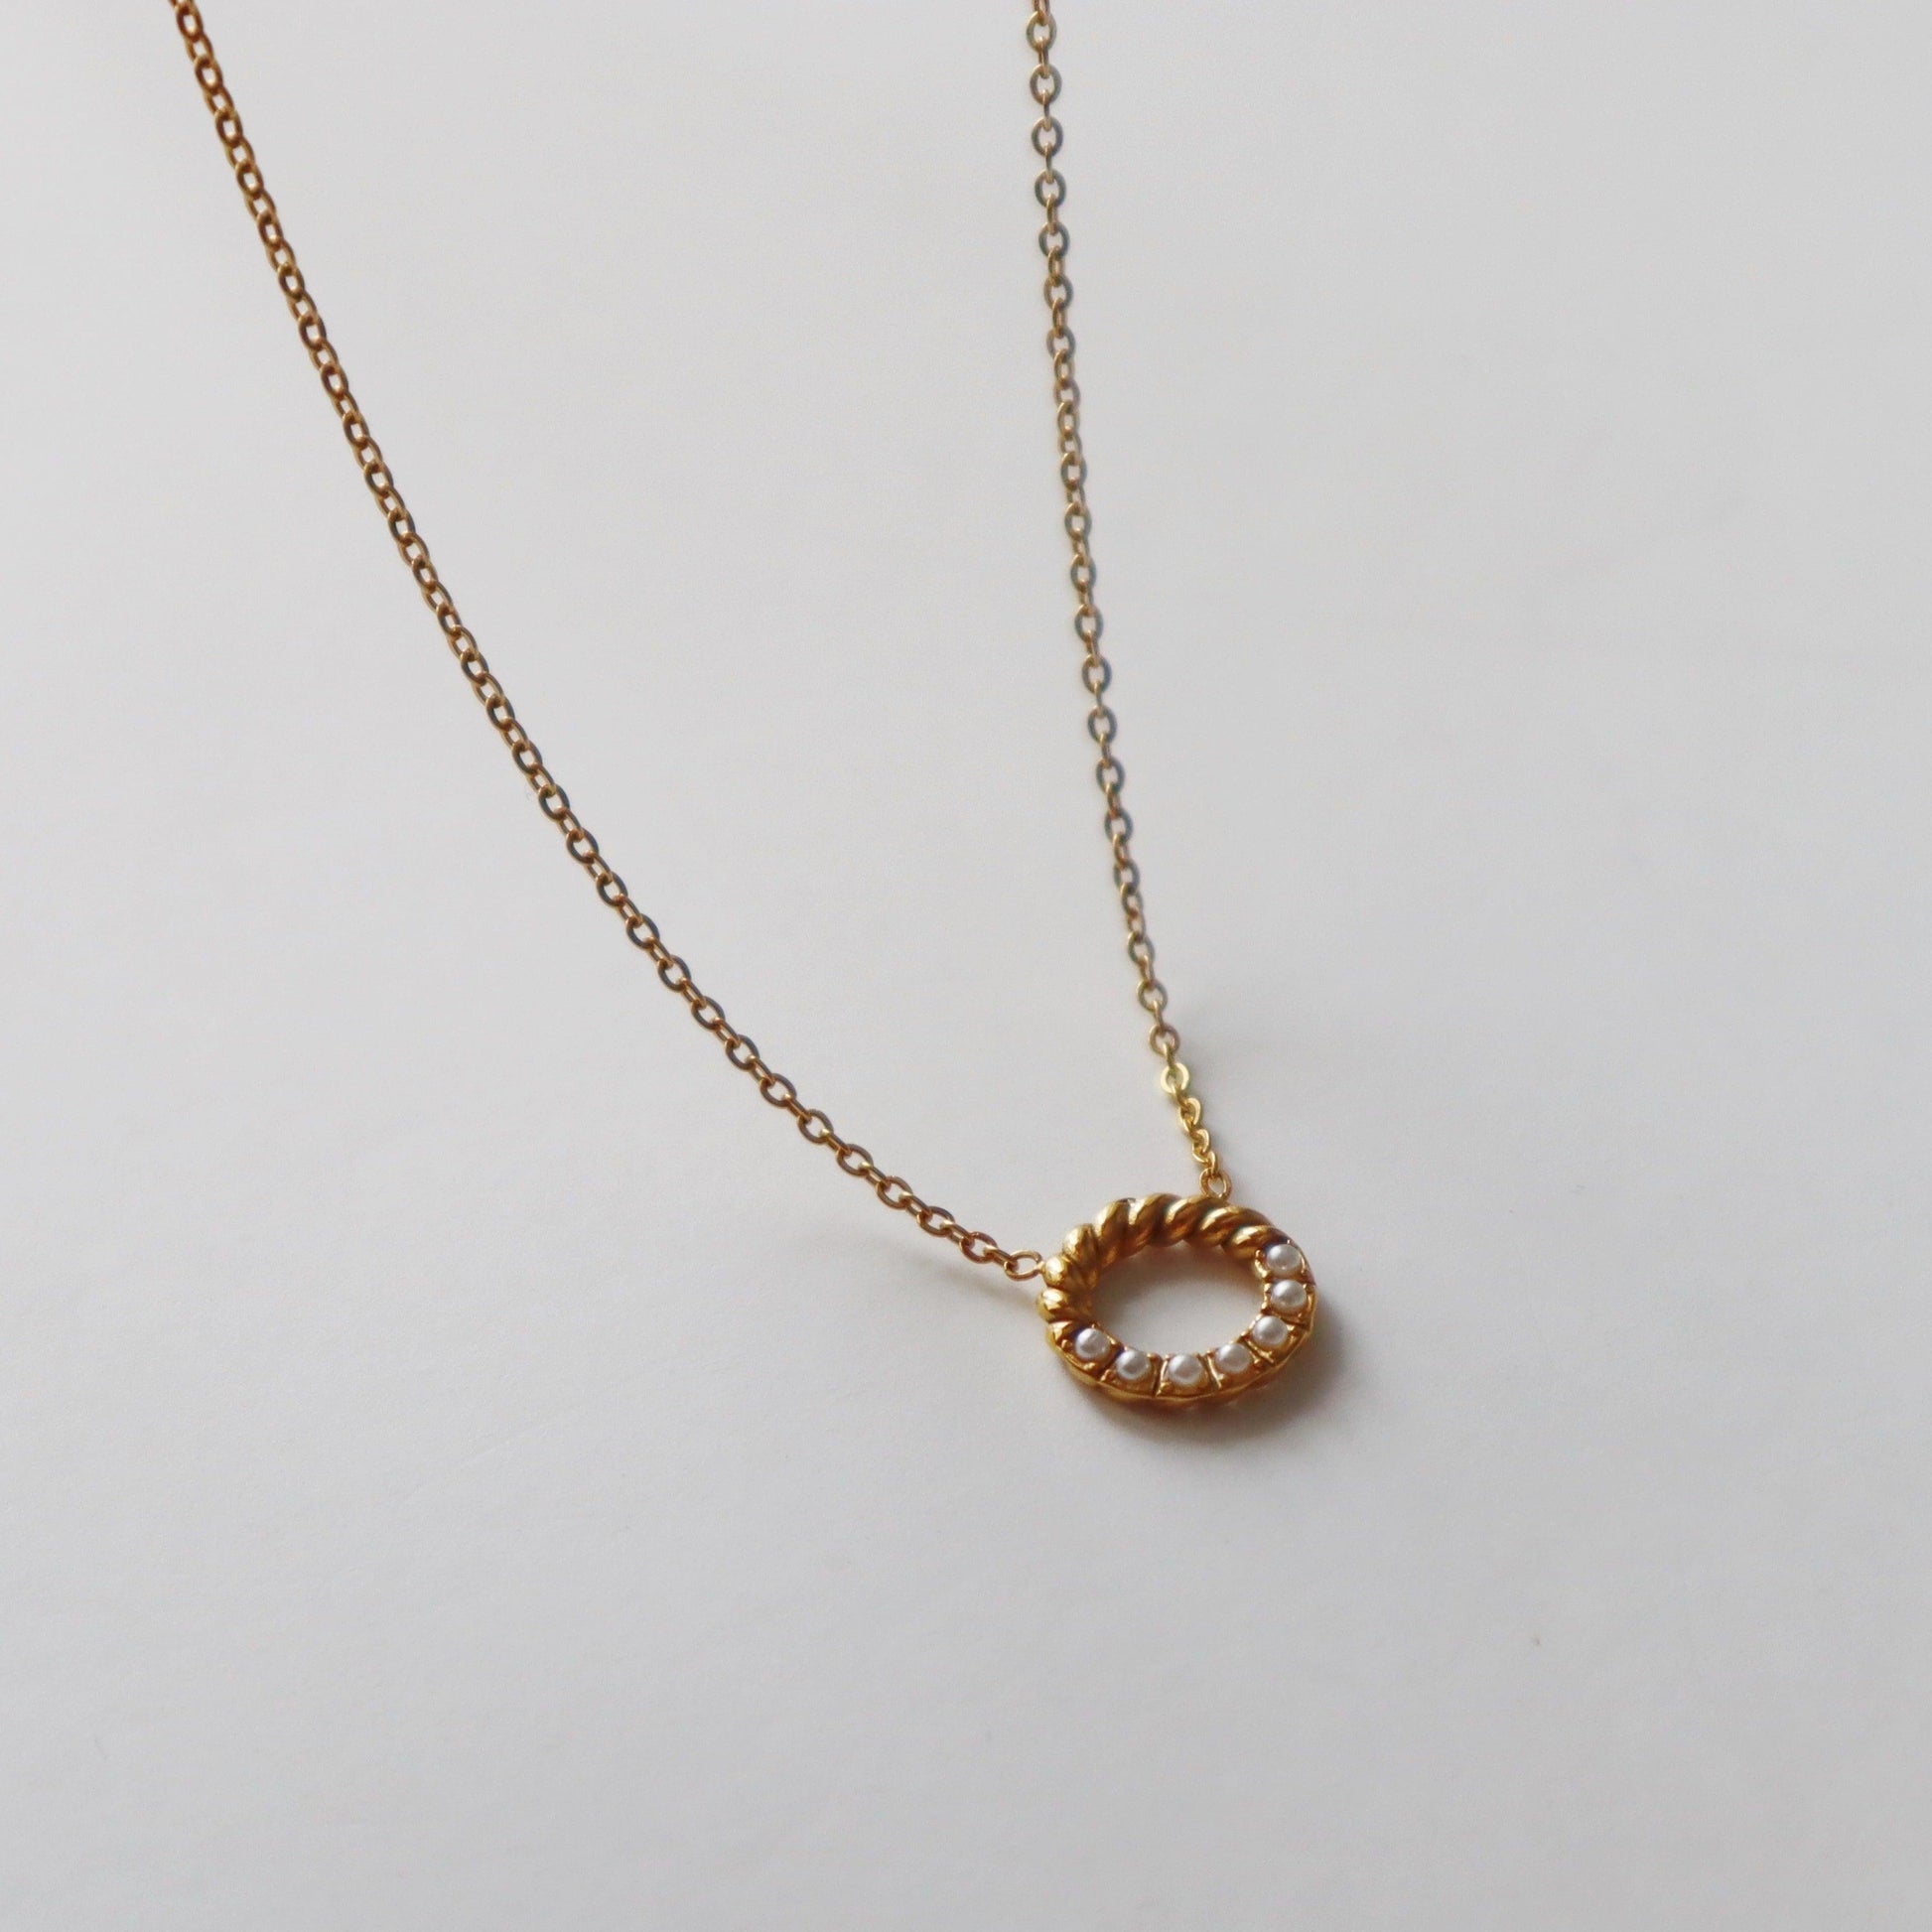 Chloe Necklace | Pearl Pendant Necklace - JESSA JEWELRY | GOLD JEWELRY; dainty, affordable gold everyday jewelry. Tarnish free, water-resistant, hypoallergenic. Jewelry for everyday wear